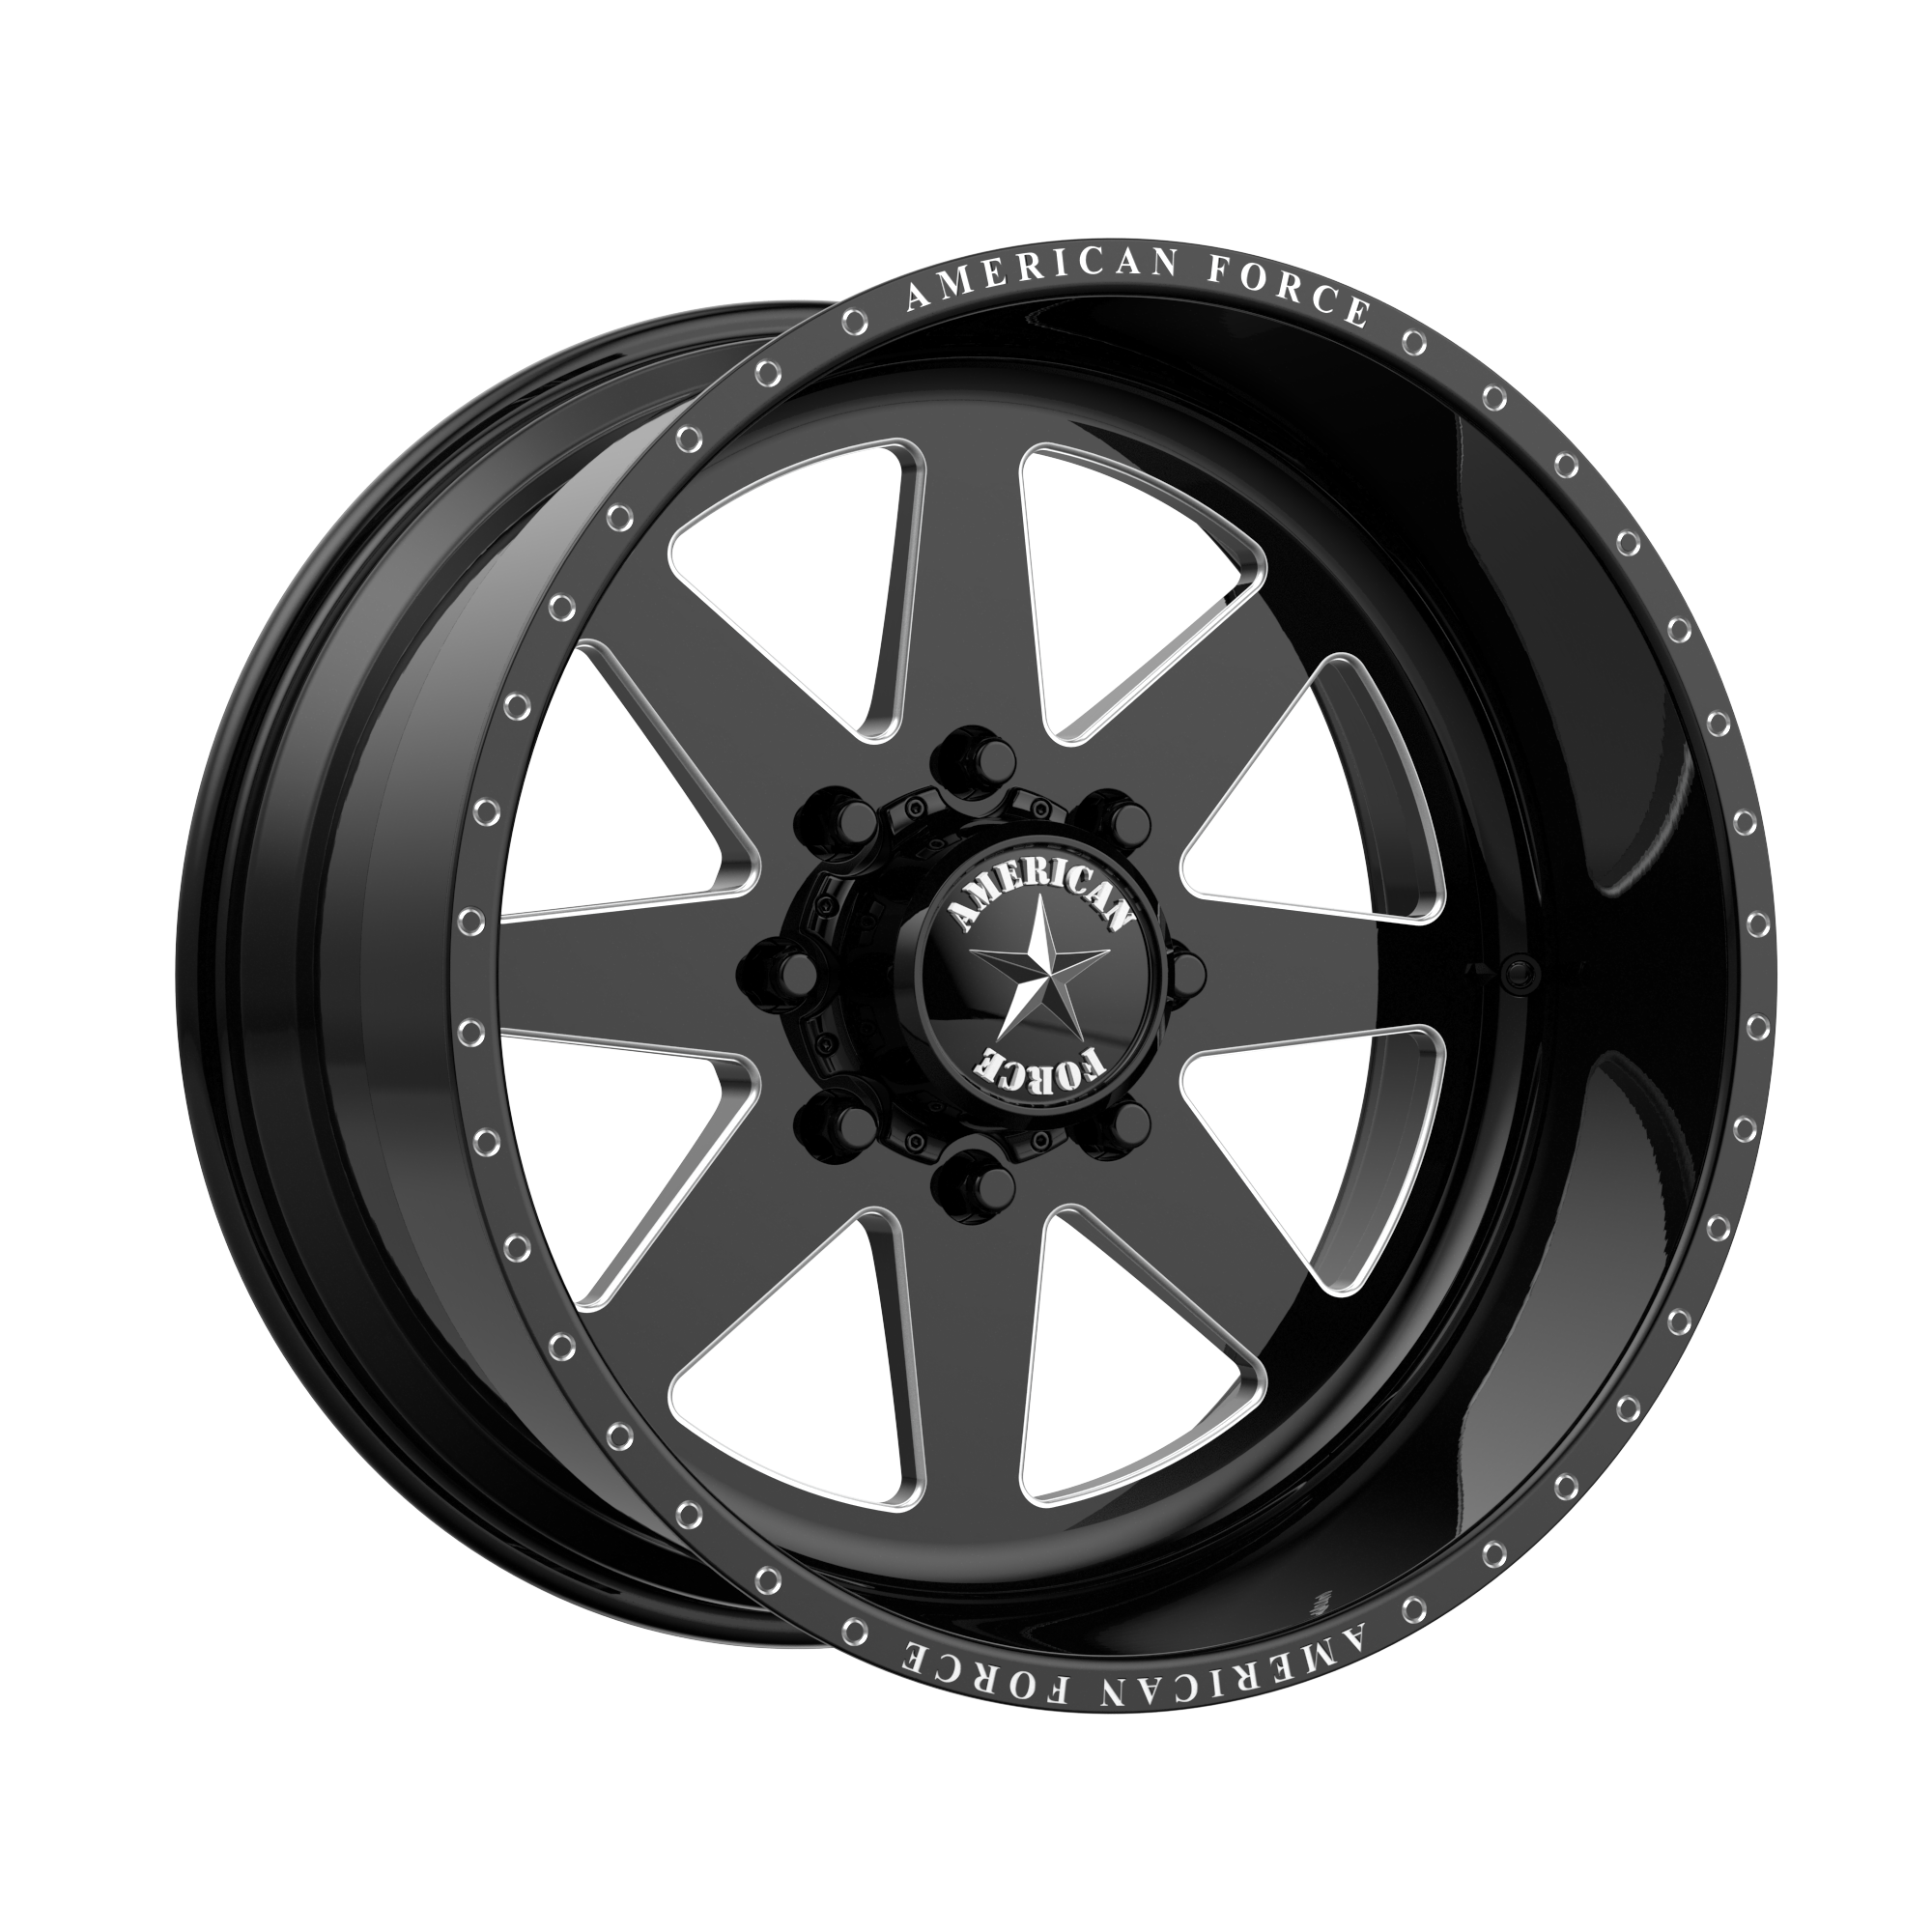 INDEPENDENCE SS 22x16 8x165.10 GLOSS BLACK MACHINED (-101 mm) - Tires and Engine Performance